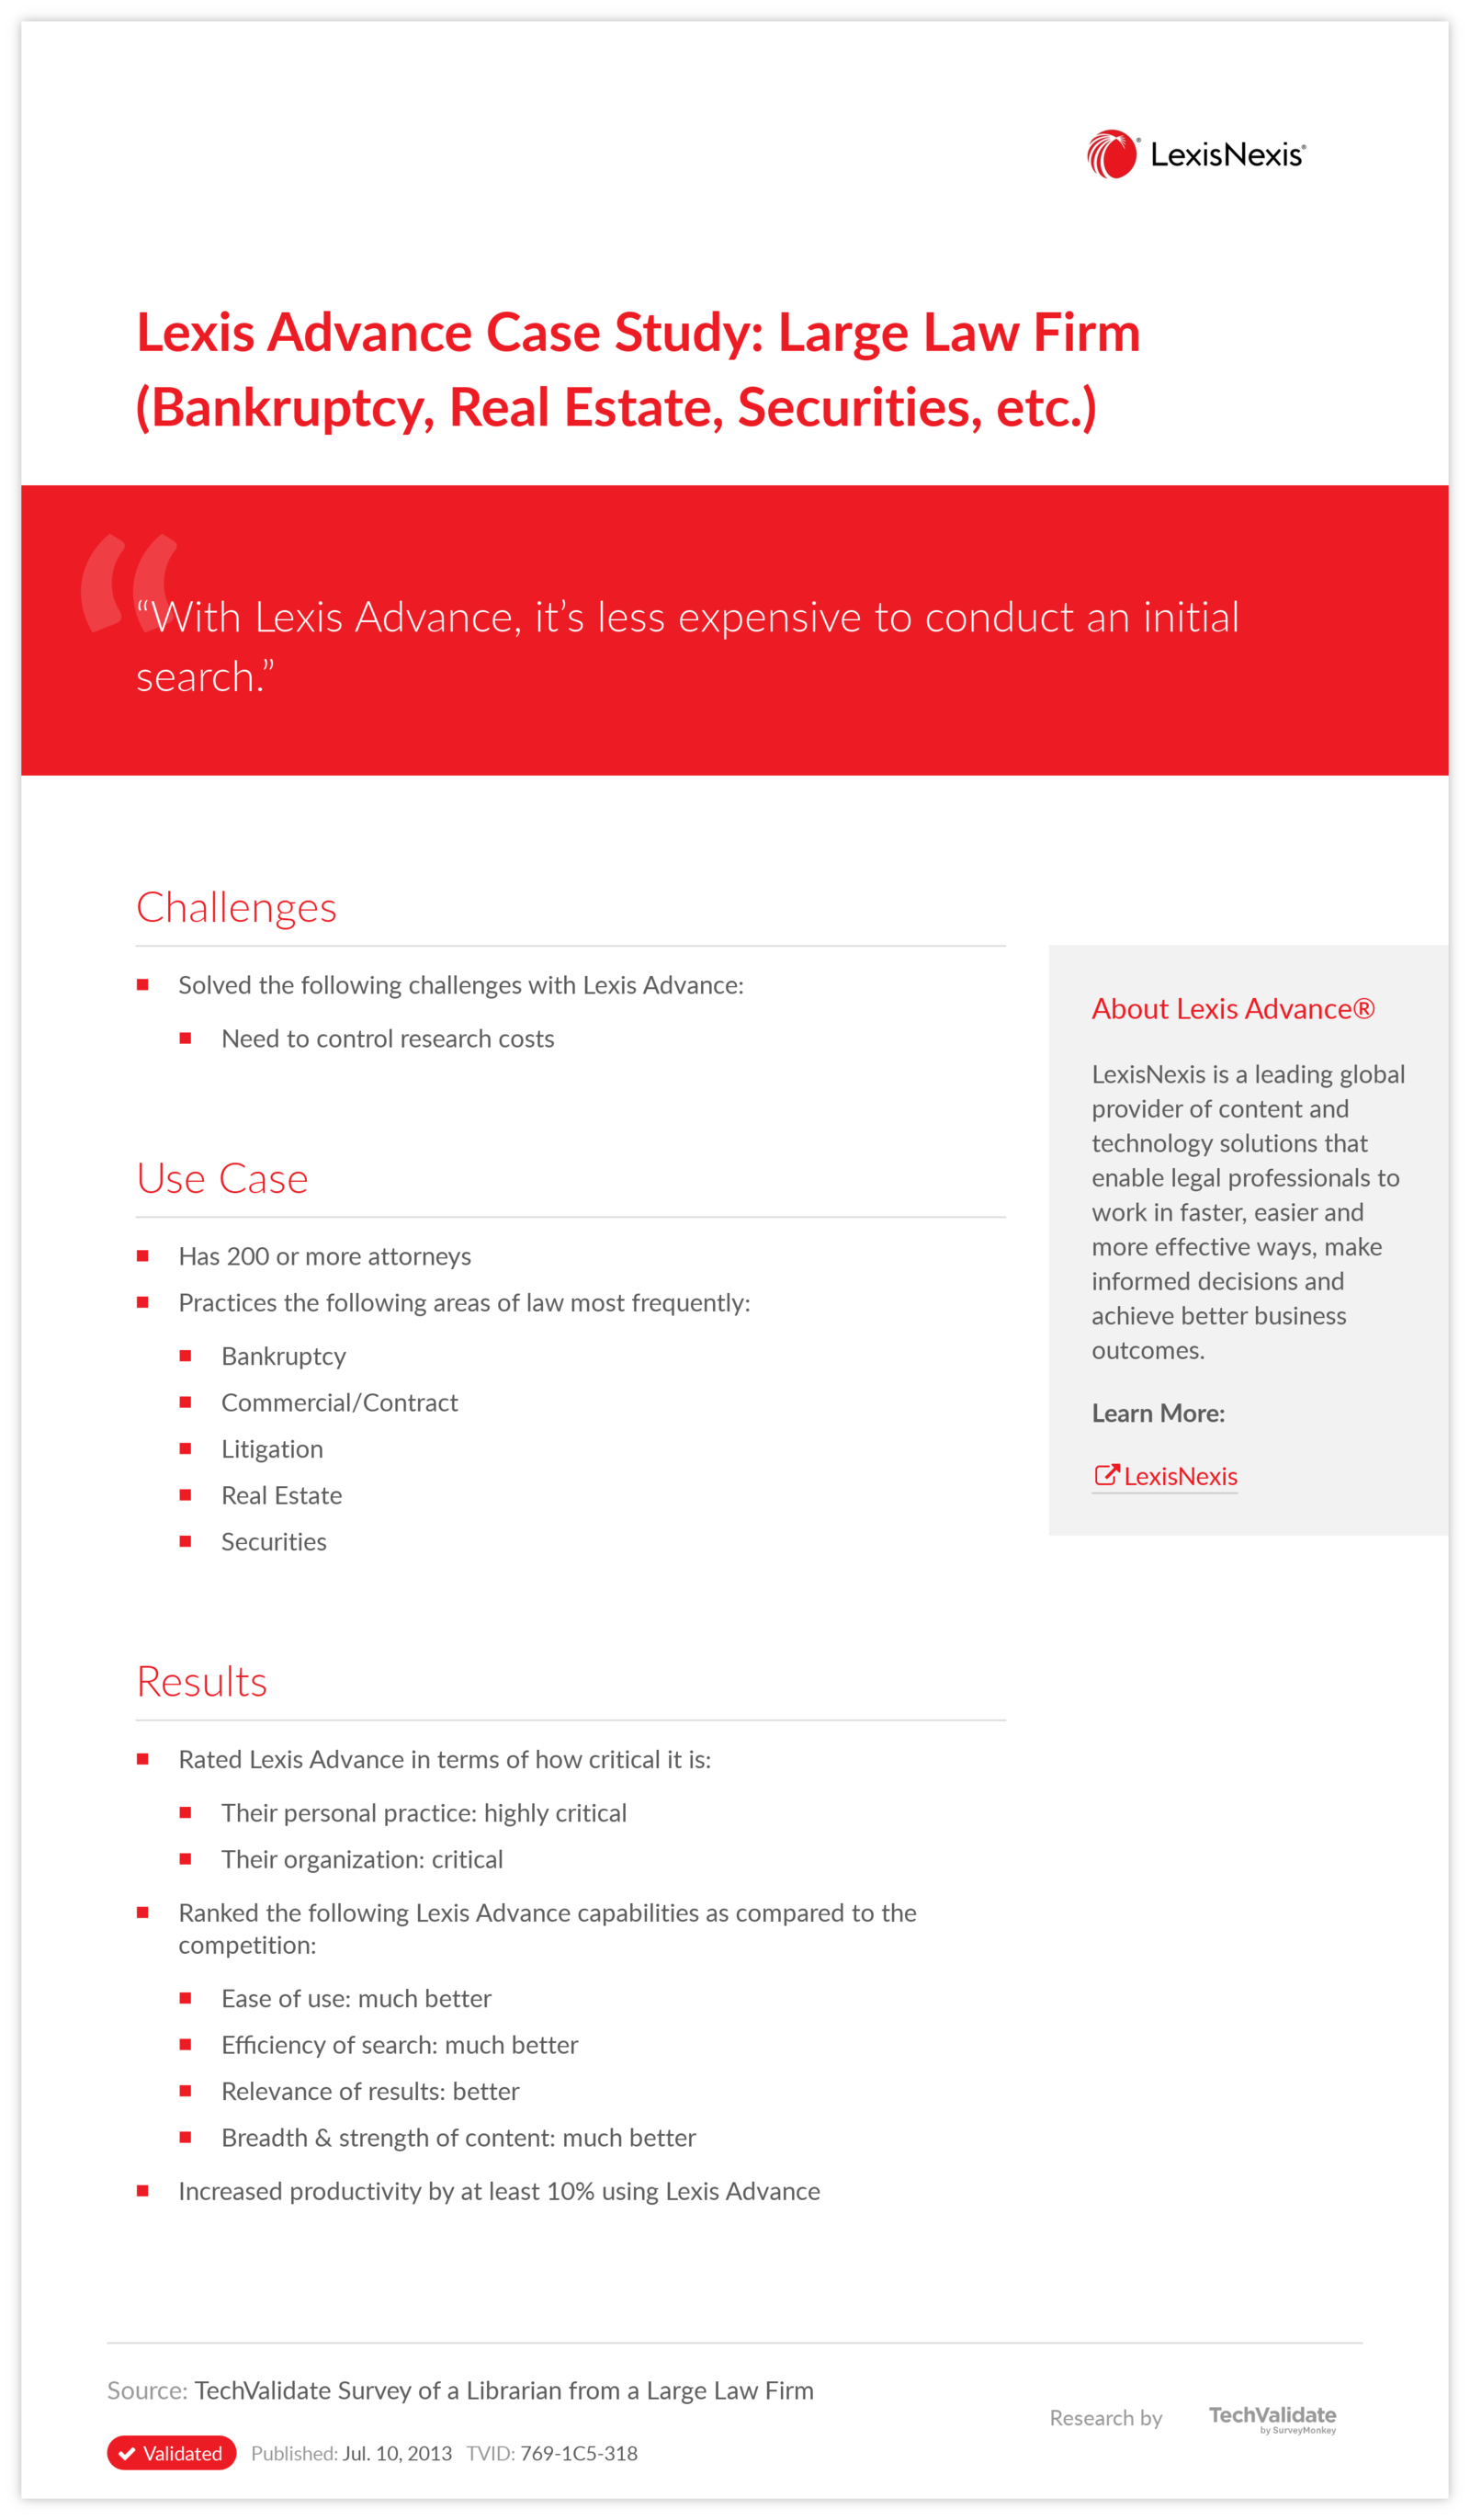 Lexis Advance Case Study: Large Law Firm (Bankruptcy, Real Estate, Securities, etc.)